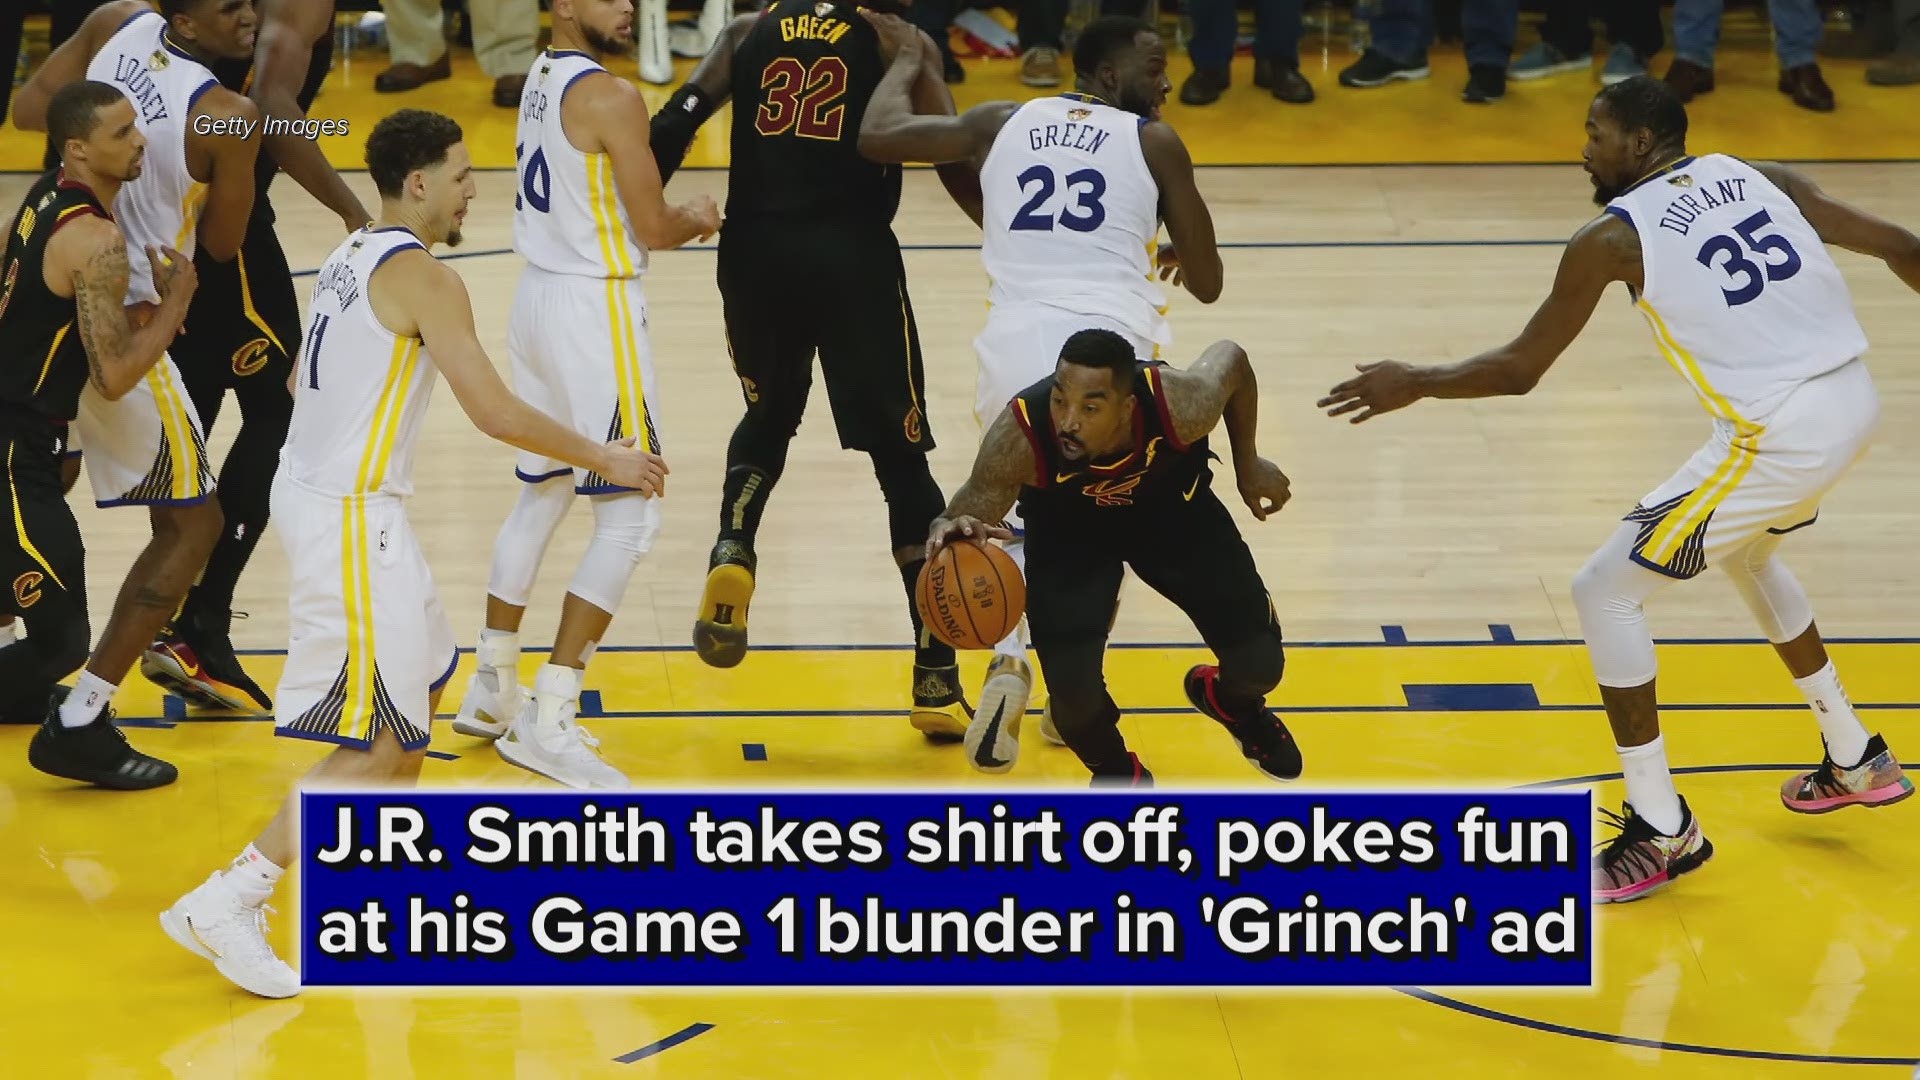 Cleveland Cavaliers' J.R. Smith takes shirt off, pokes fun at his Game 1 blunder in 'Grinch' ad